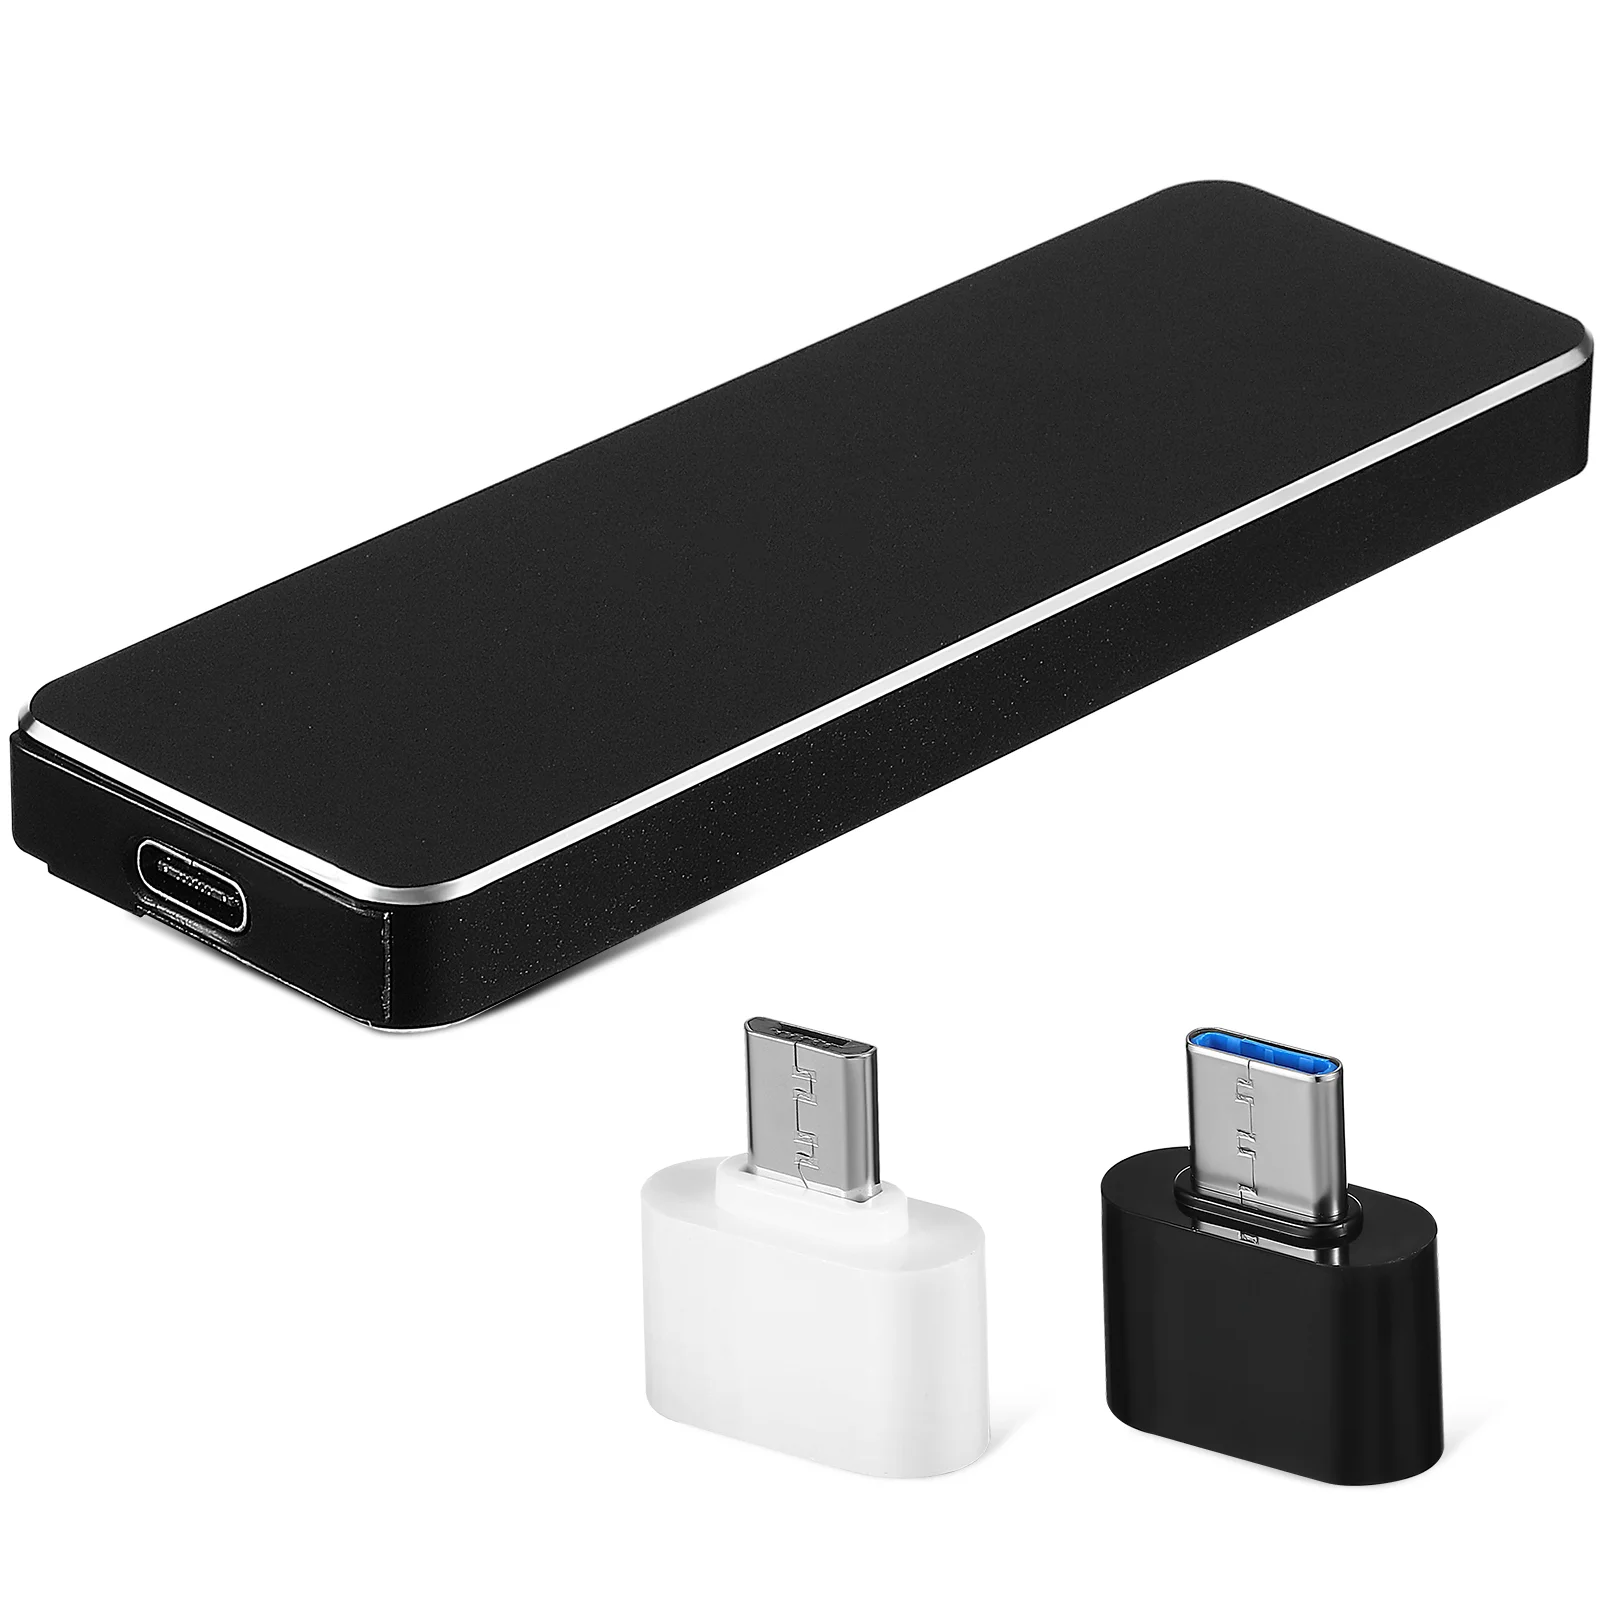 

Portable Hard Drive USB SSD External Harddrive Compact Storage Solid State Drives